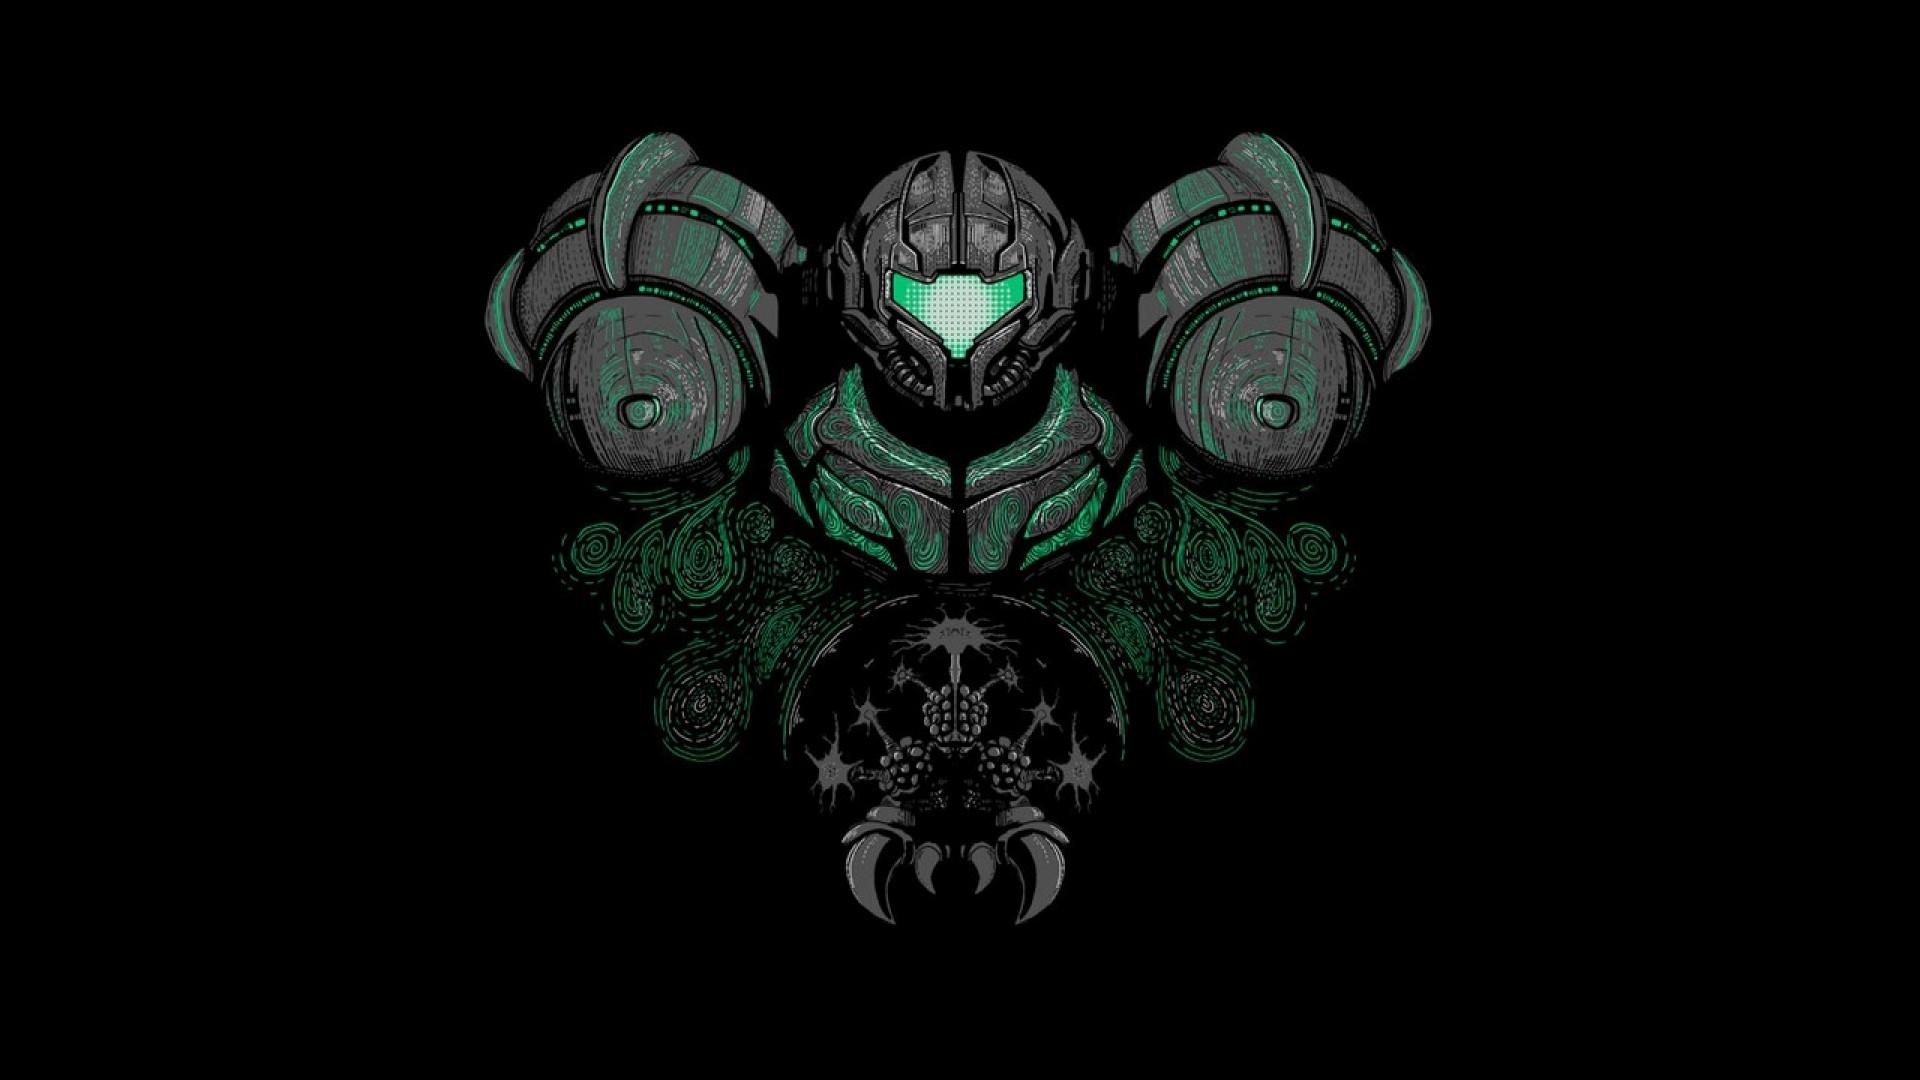 metroid live wallpaper,green,darkness,personal protective equipment,fictional character,graphic design